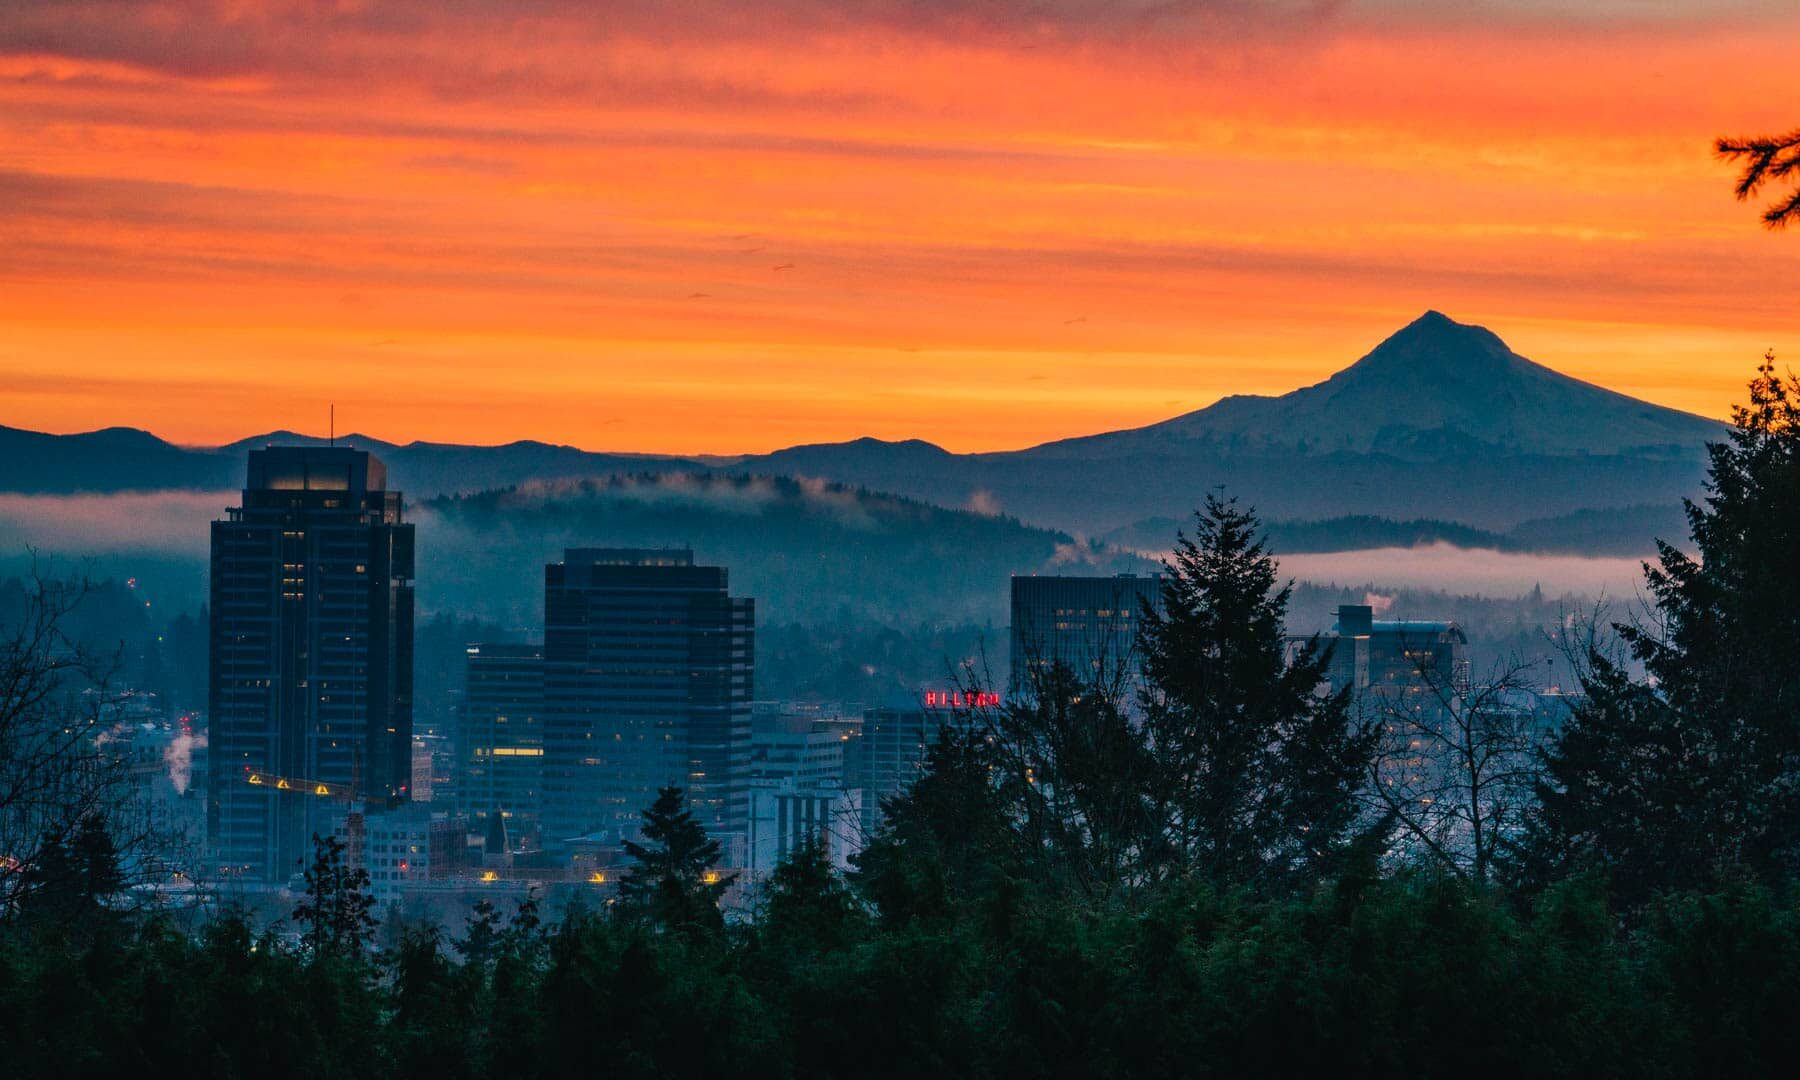 Direct flights from Calgary to Portland for 239 CAD round-trip including GST!